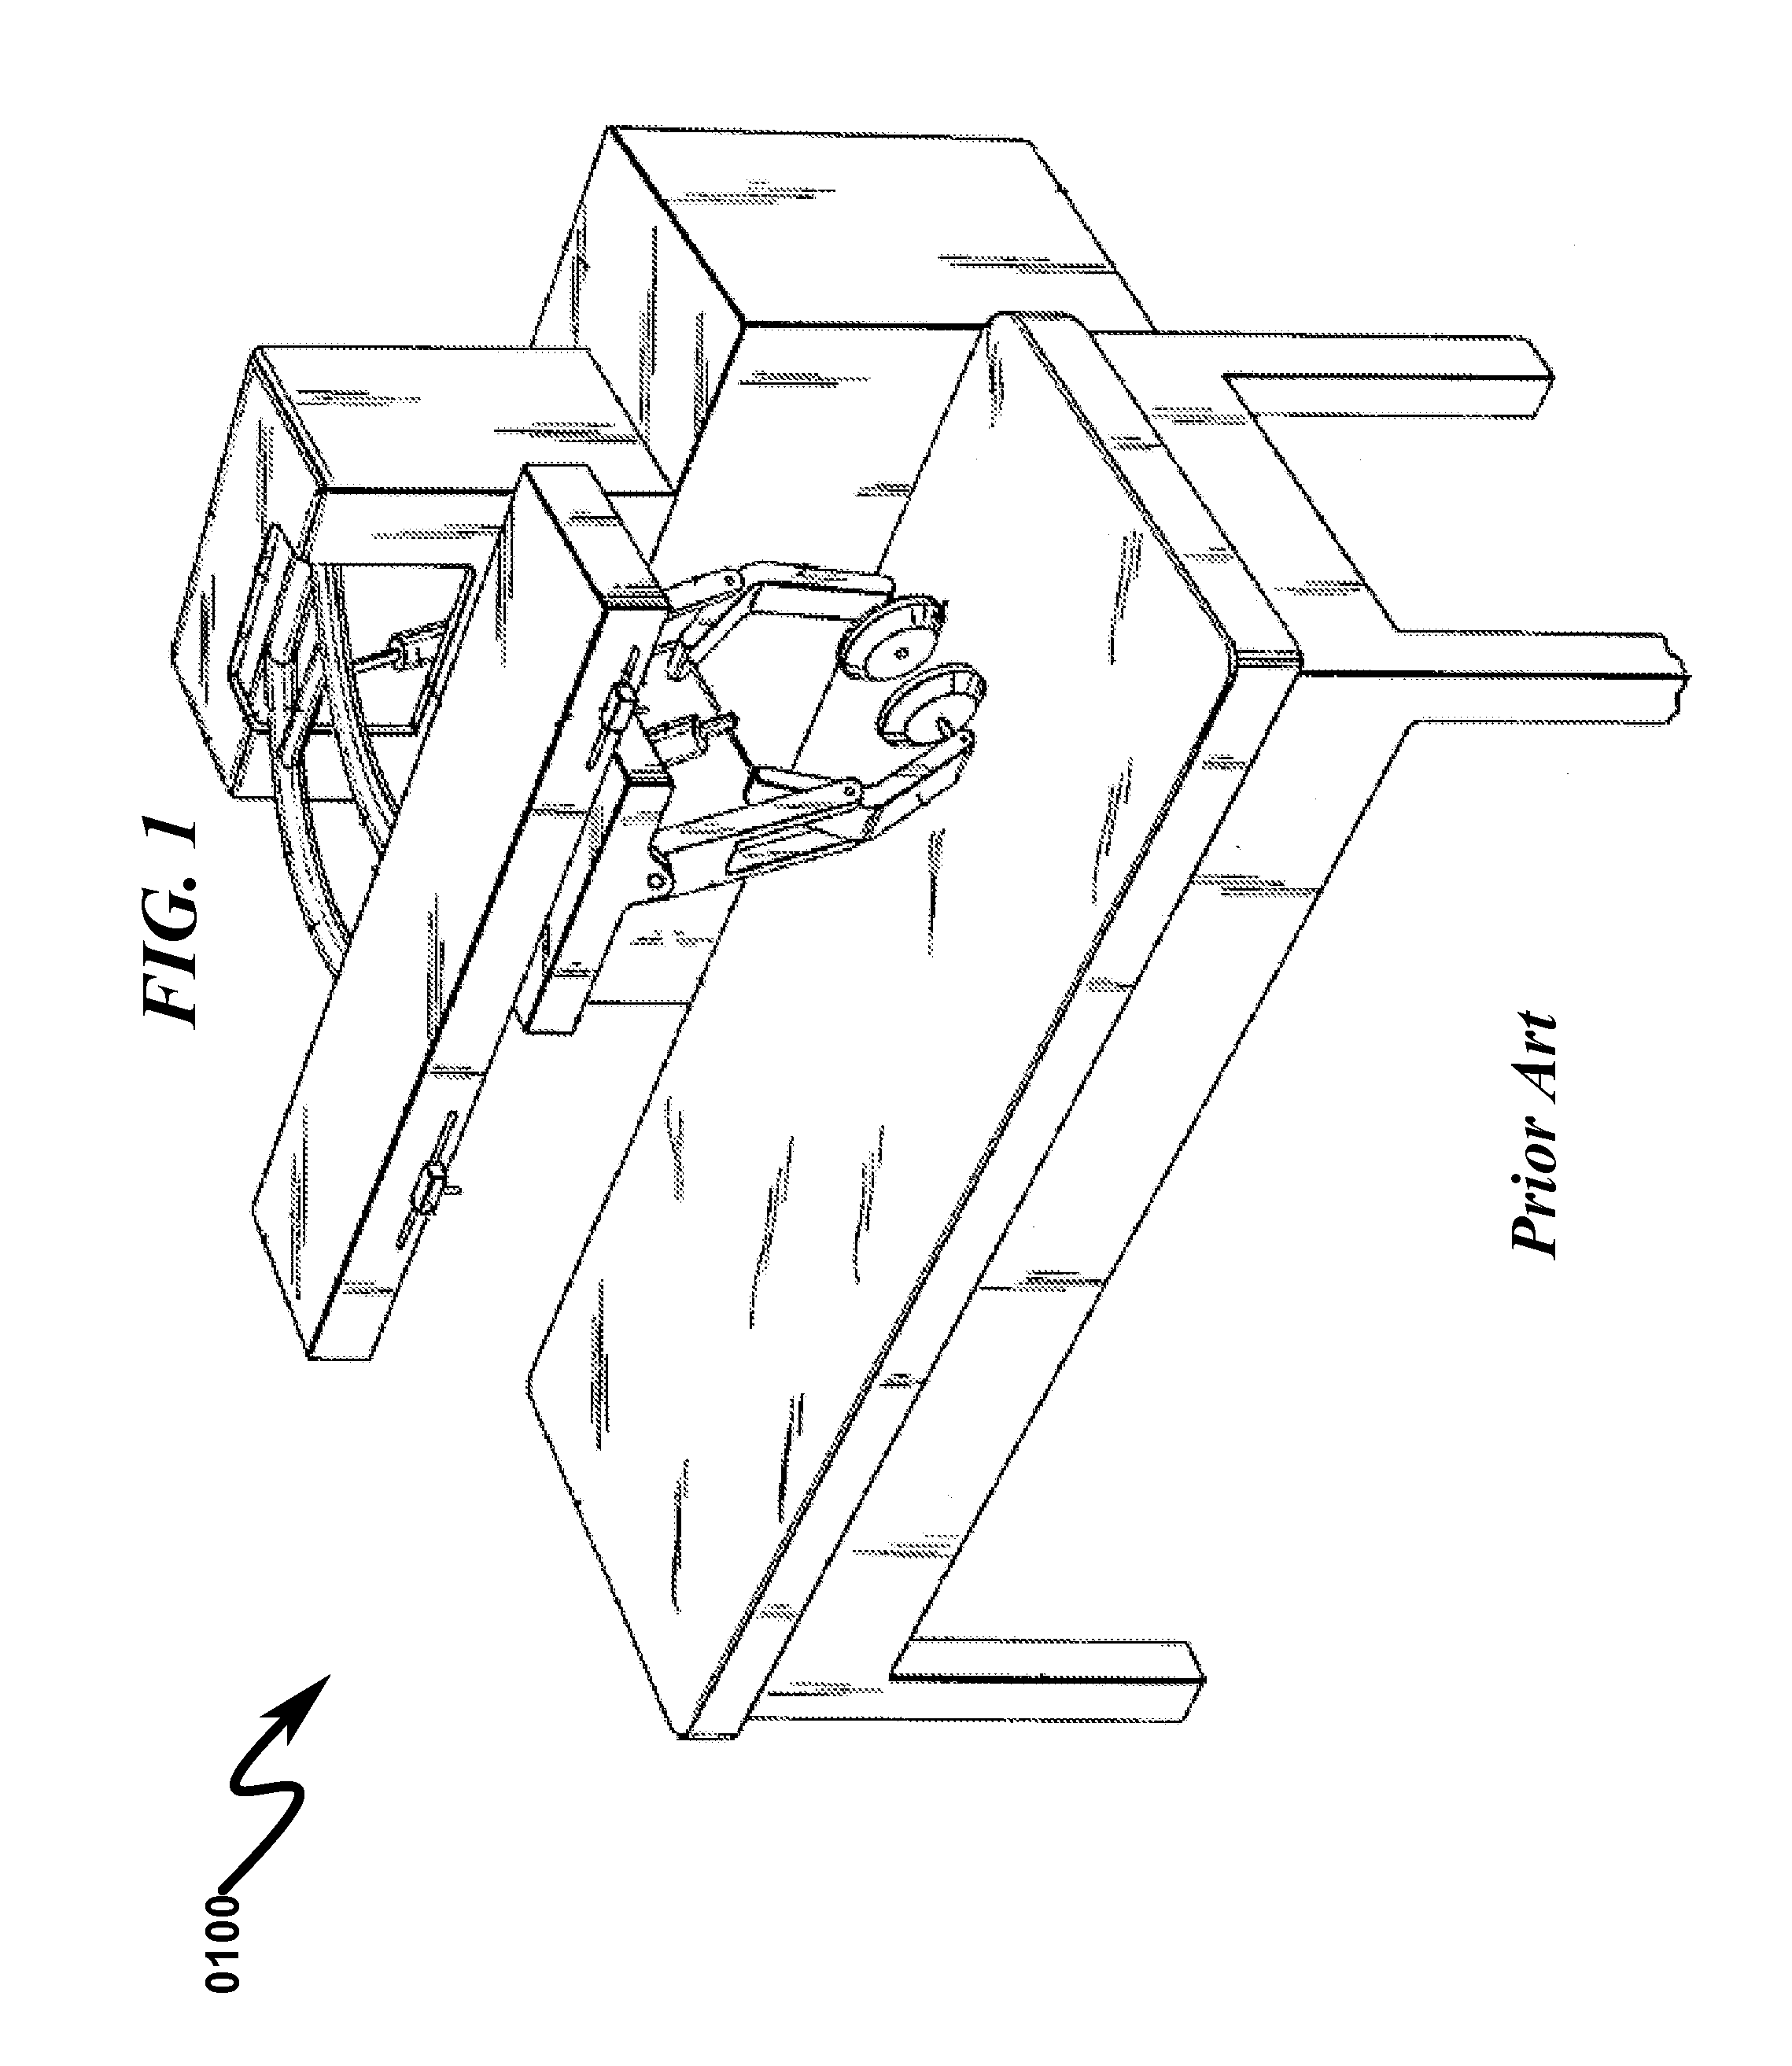 Massage Table System and Method